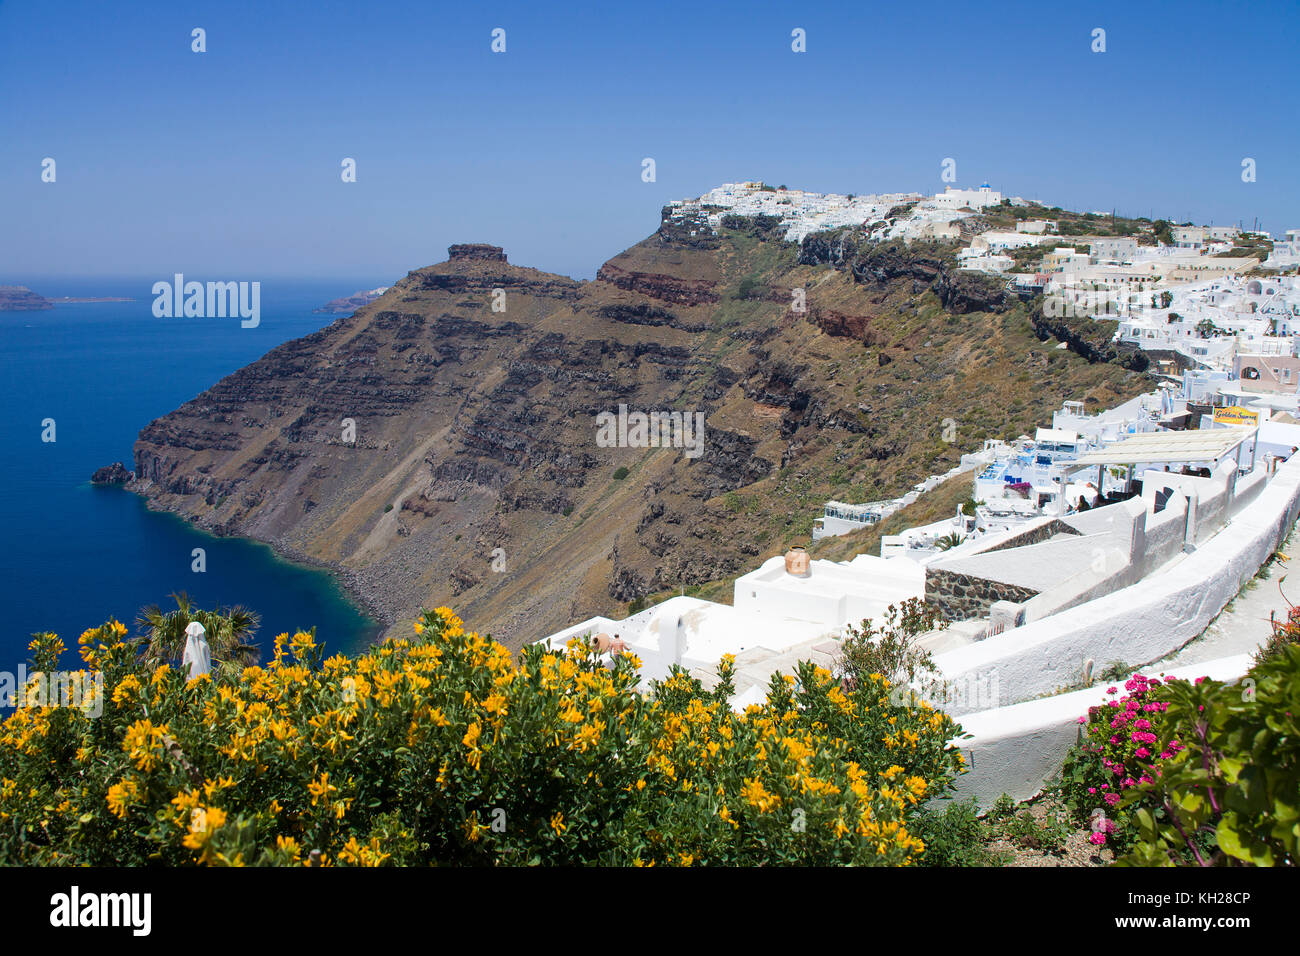 View from the crater edge path at Firofestani on Caldera and the village Imerovigli with Scaros rock, Santorini, Cyclades, Greece, Mediterranean S Stock Photo